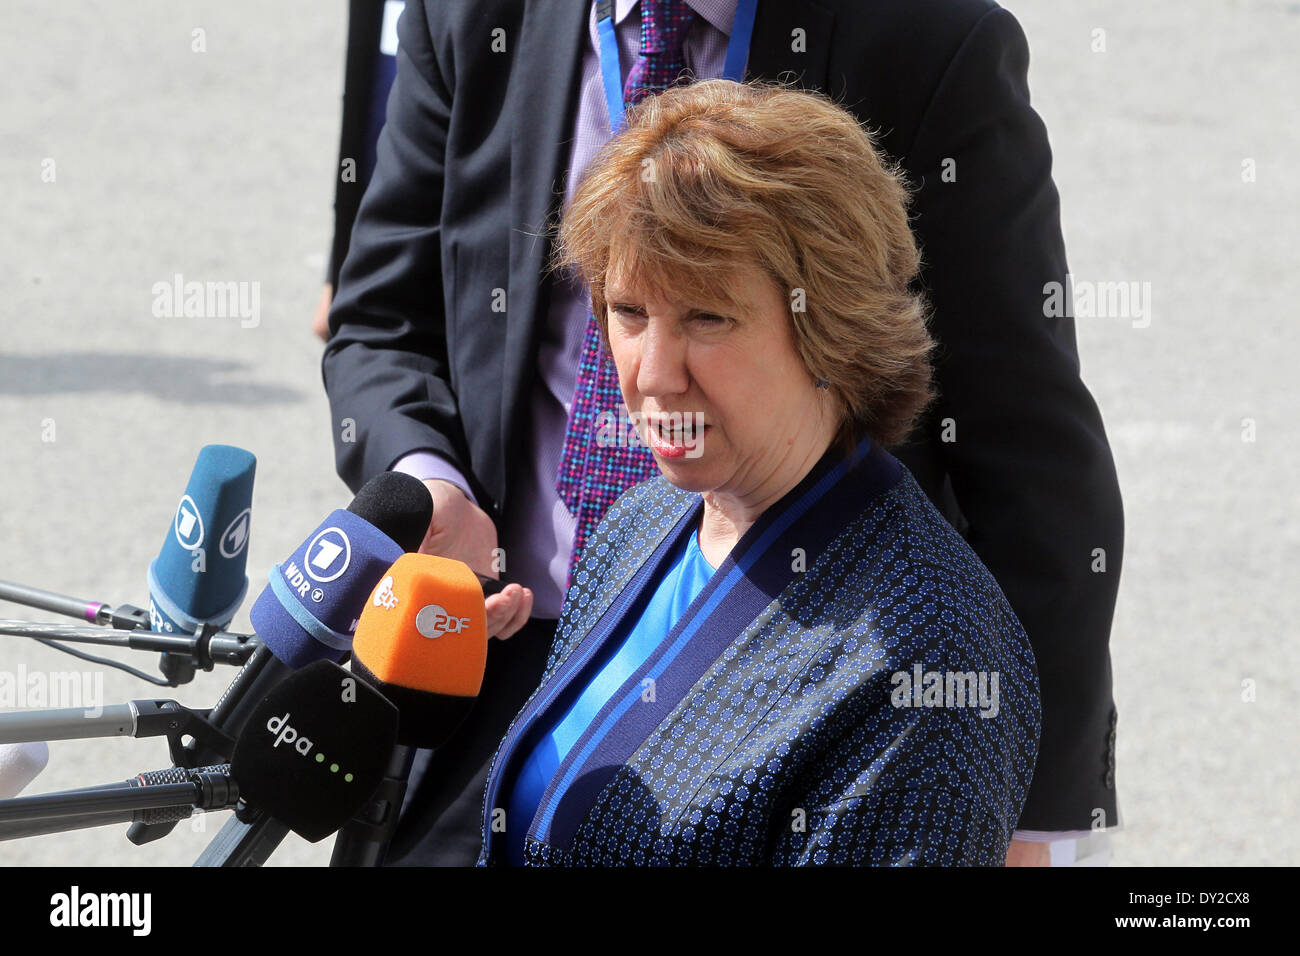 Athens, Greece. 4th Apr, 2014. Catherine Ashton, the EU's High Representative for Foreign Affairs and Security Policy, arrives for the Informal Meeting of Foreign Affairs Ministers at the Zappeion Hall in Athens, capital of Greece, on April 4, 2014. © Marios Lolos/Xinhua/Alamy Live News Stock Photo